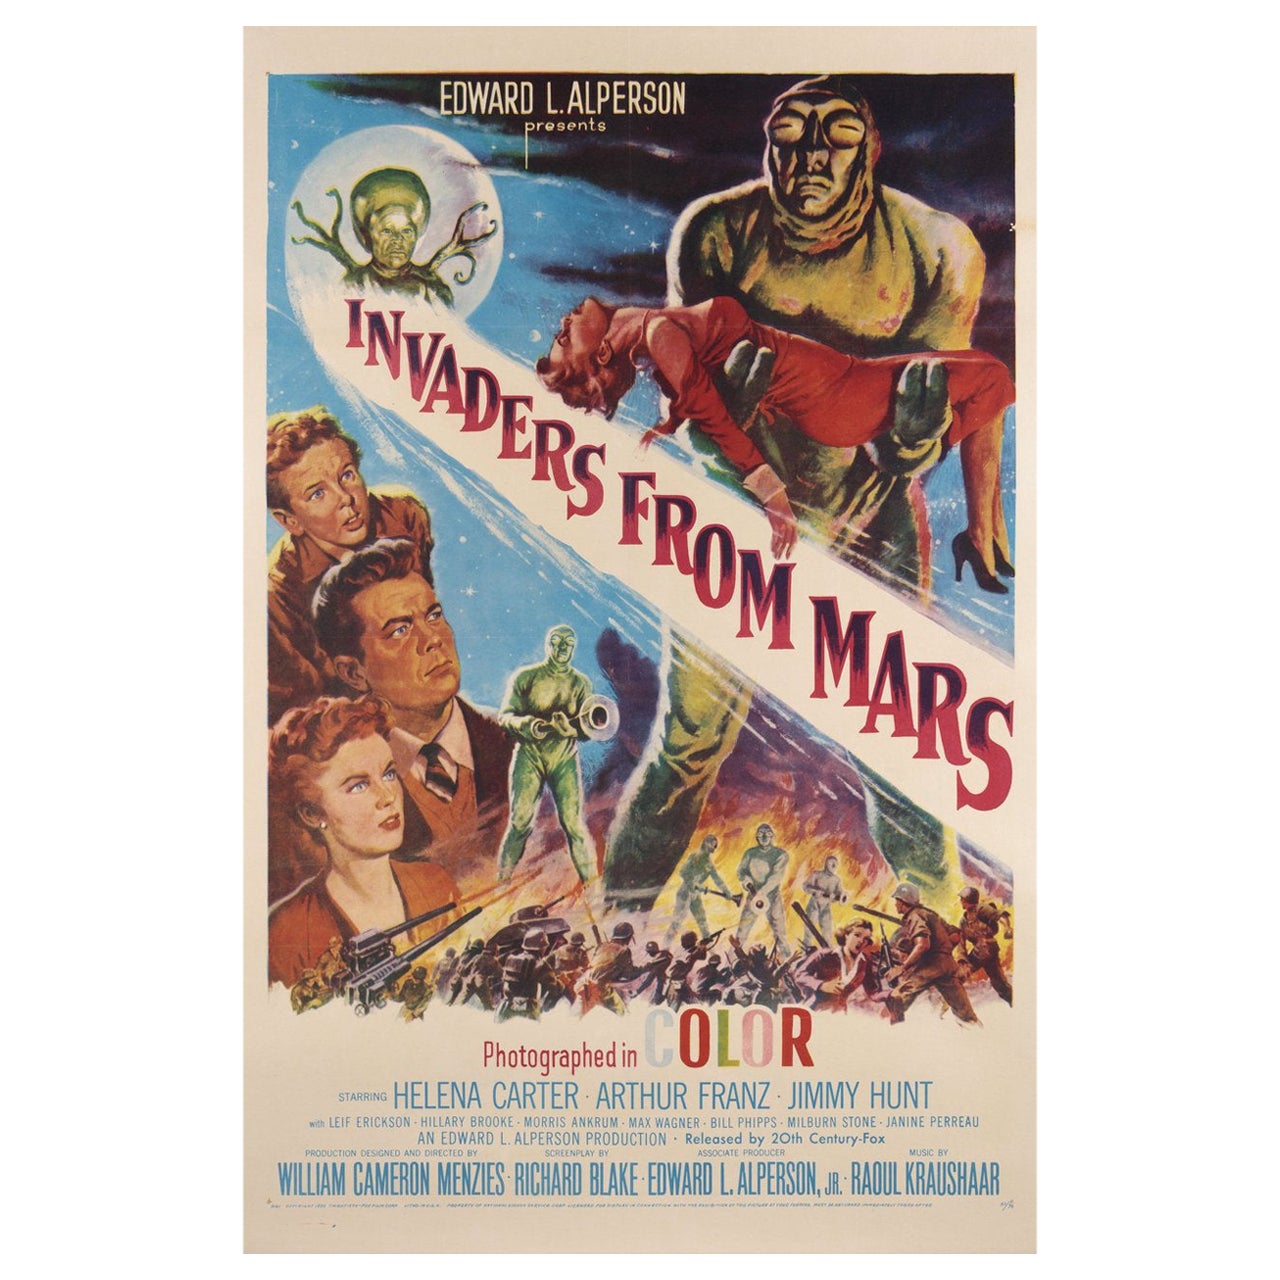 Invaders from Mars R1955 U.S. One Sheet Film Poster For Sale